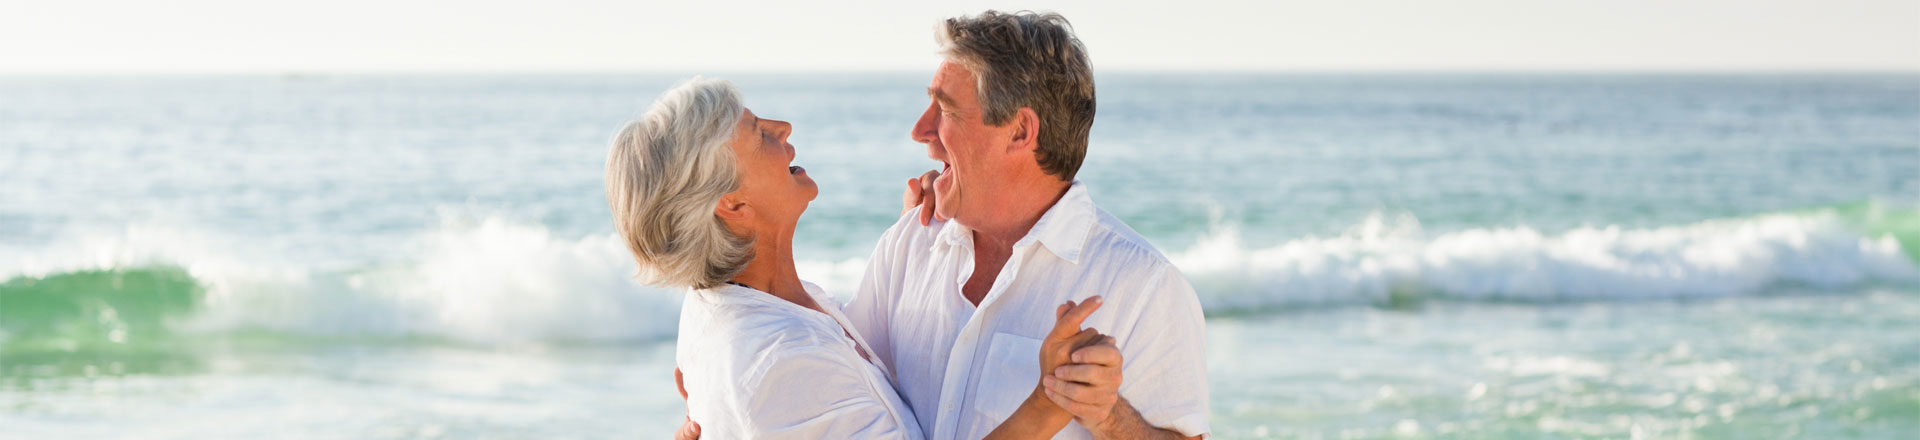 intimacy may reduce heart disease risk